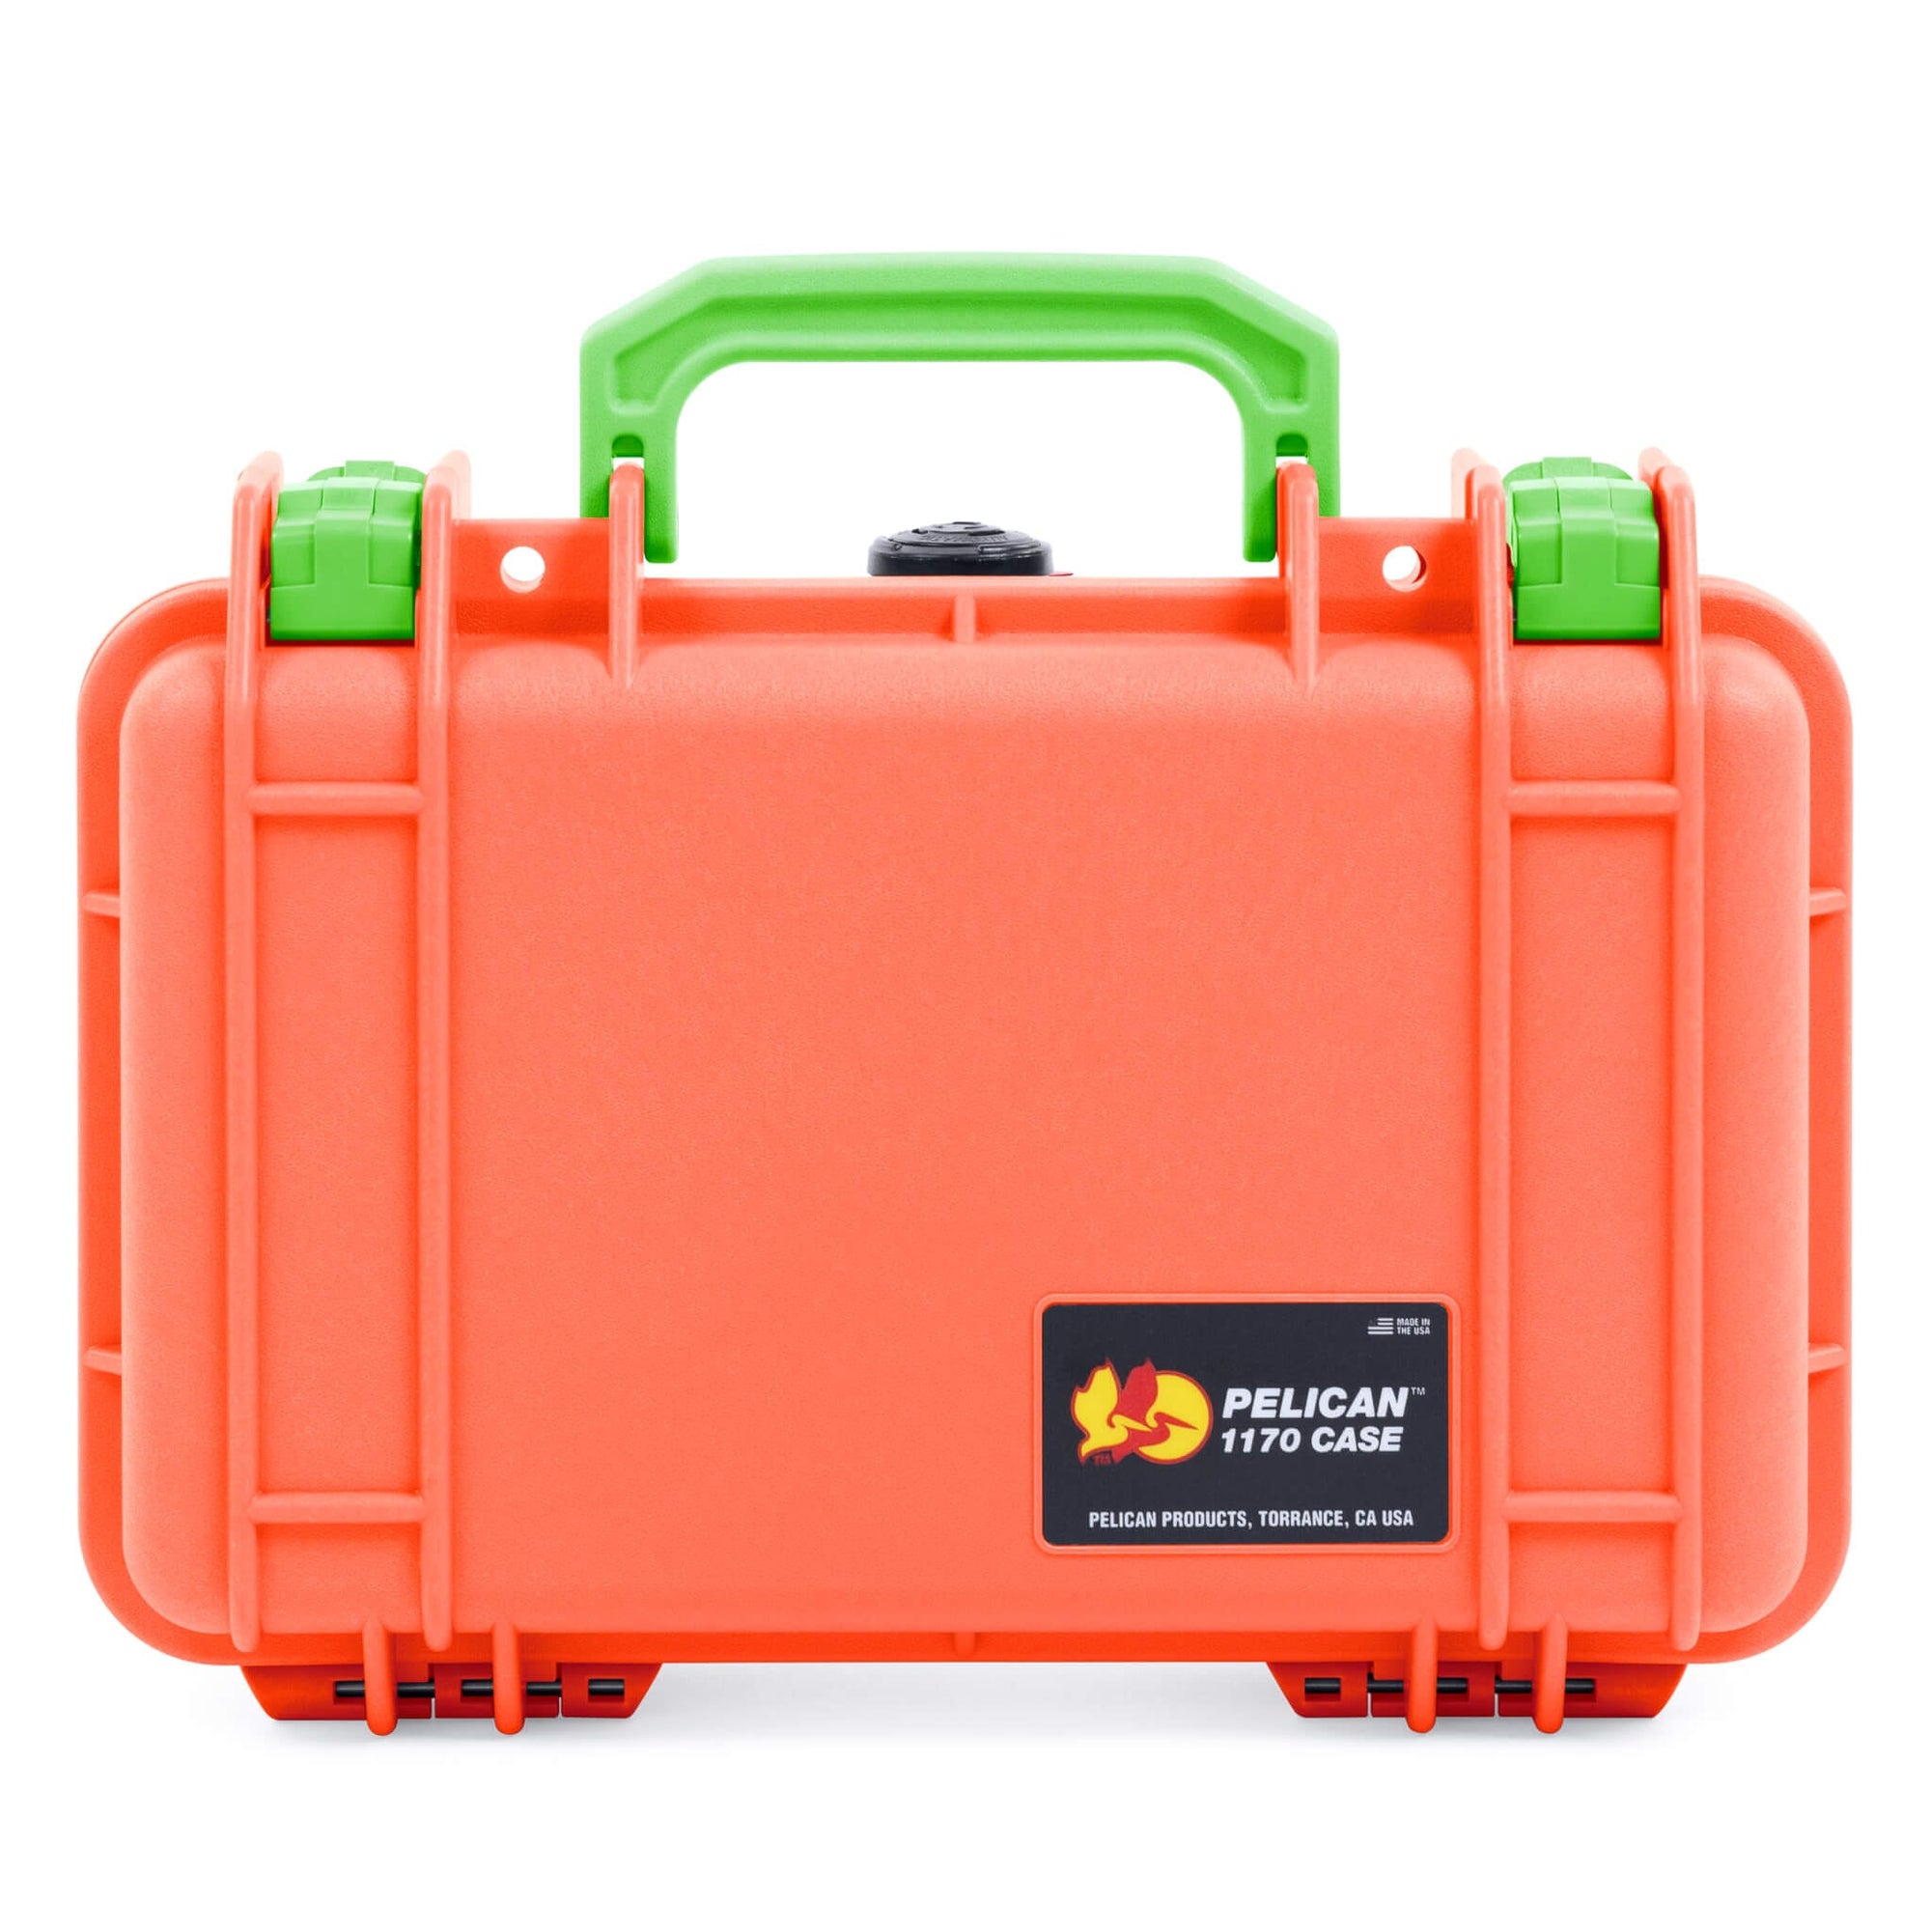 Pelican 1170 Case, Orange with Lime Green Handle & Latches ColorCase 